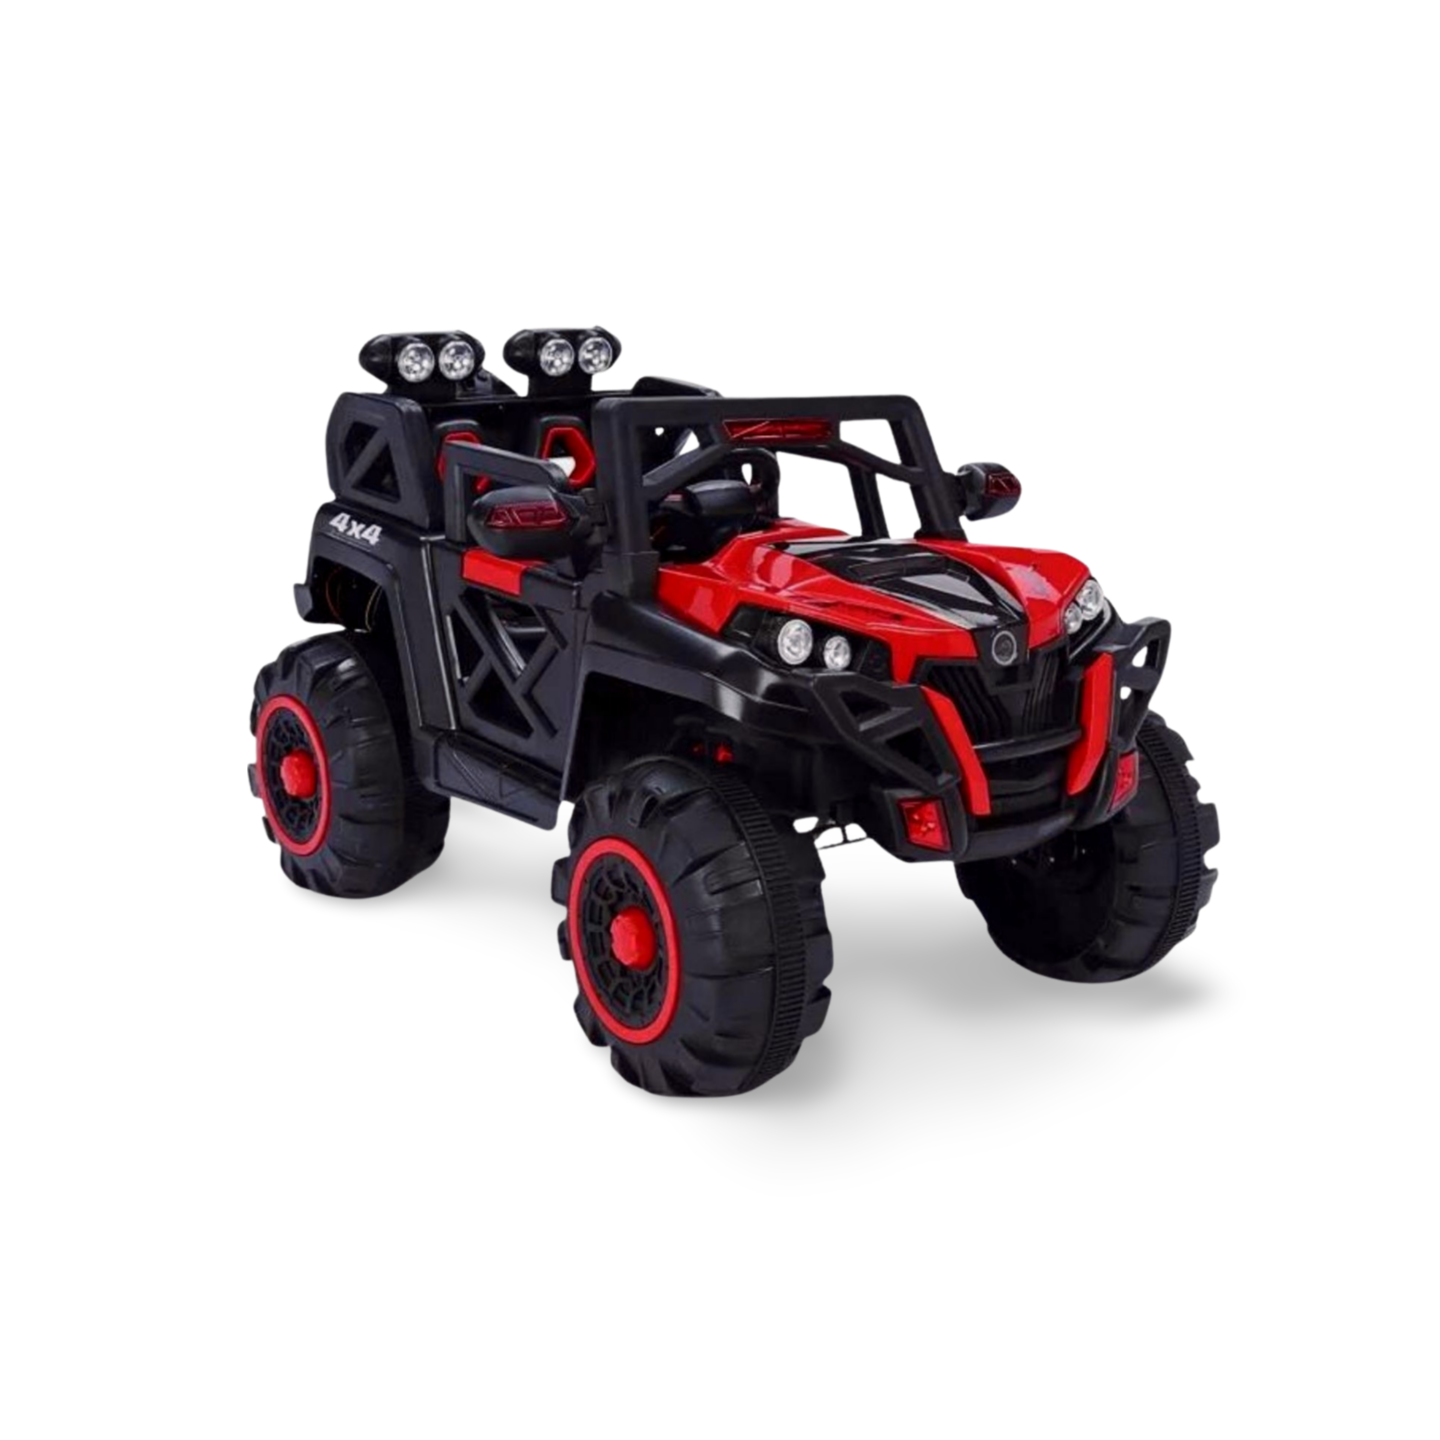 Electric 4 x 4 Jeep Ride On 2188 Painted Heavy Duty With Suspension Spring For Kids 2-8 Years Weight Capacity 45kg ,5 Motors. 12v